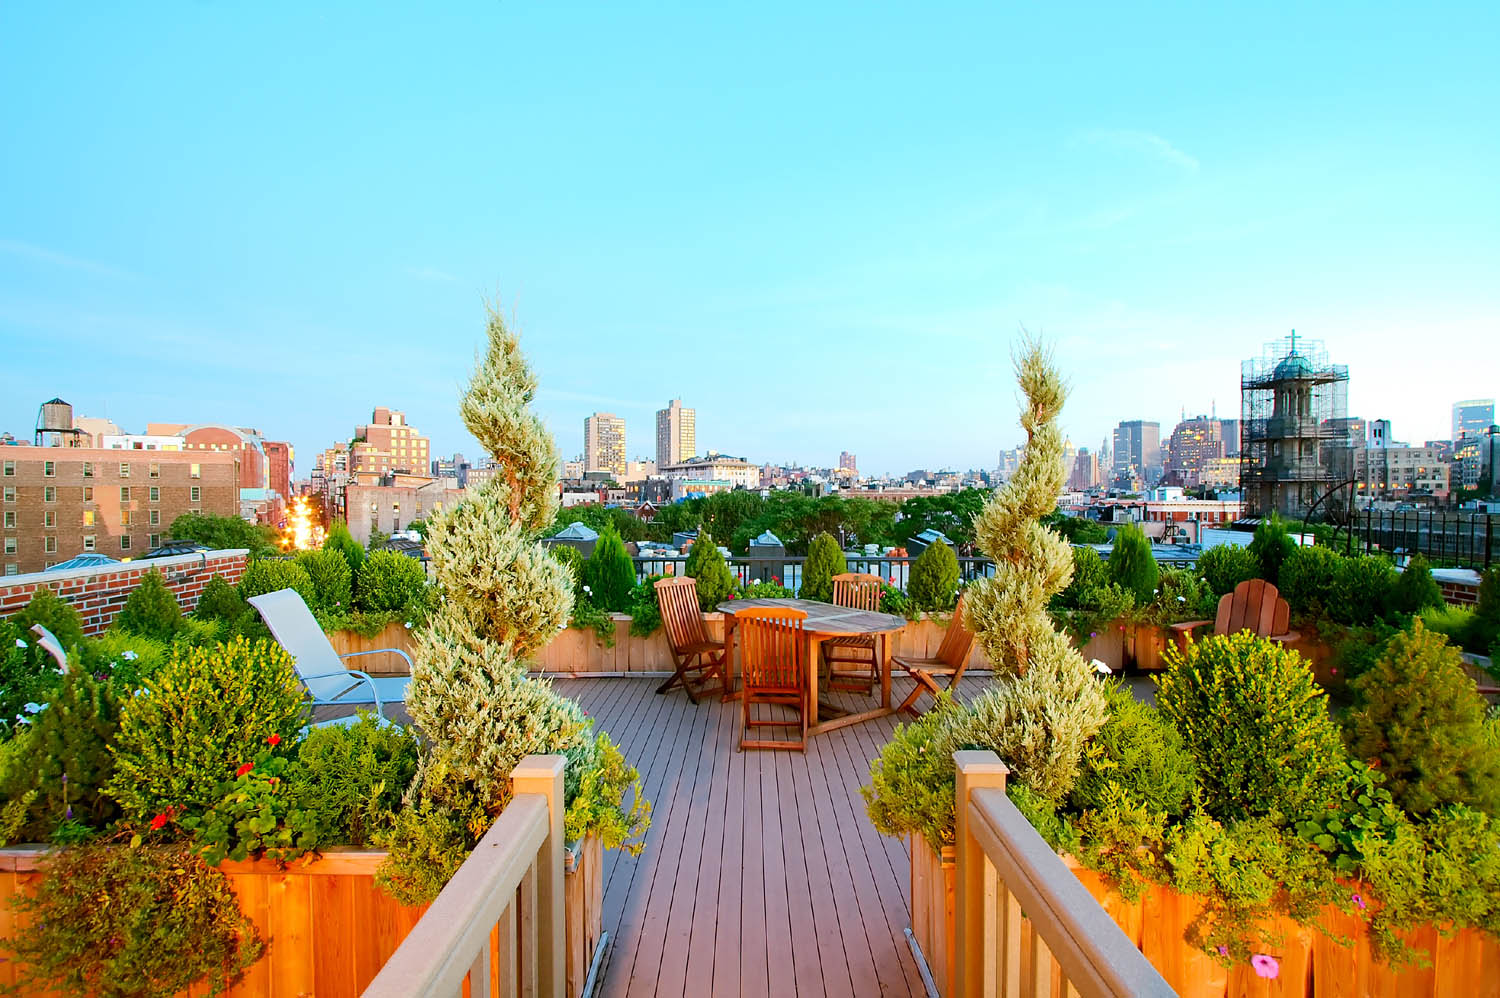 Make the most of your rooftop garden  with these design tips